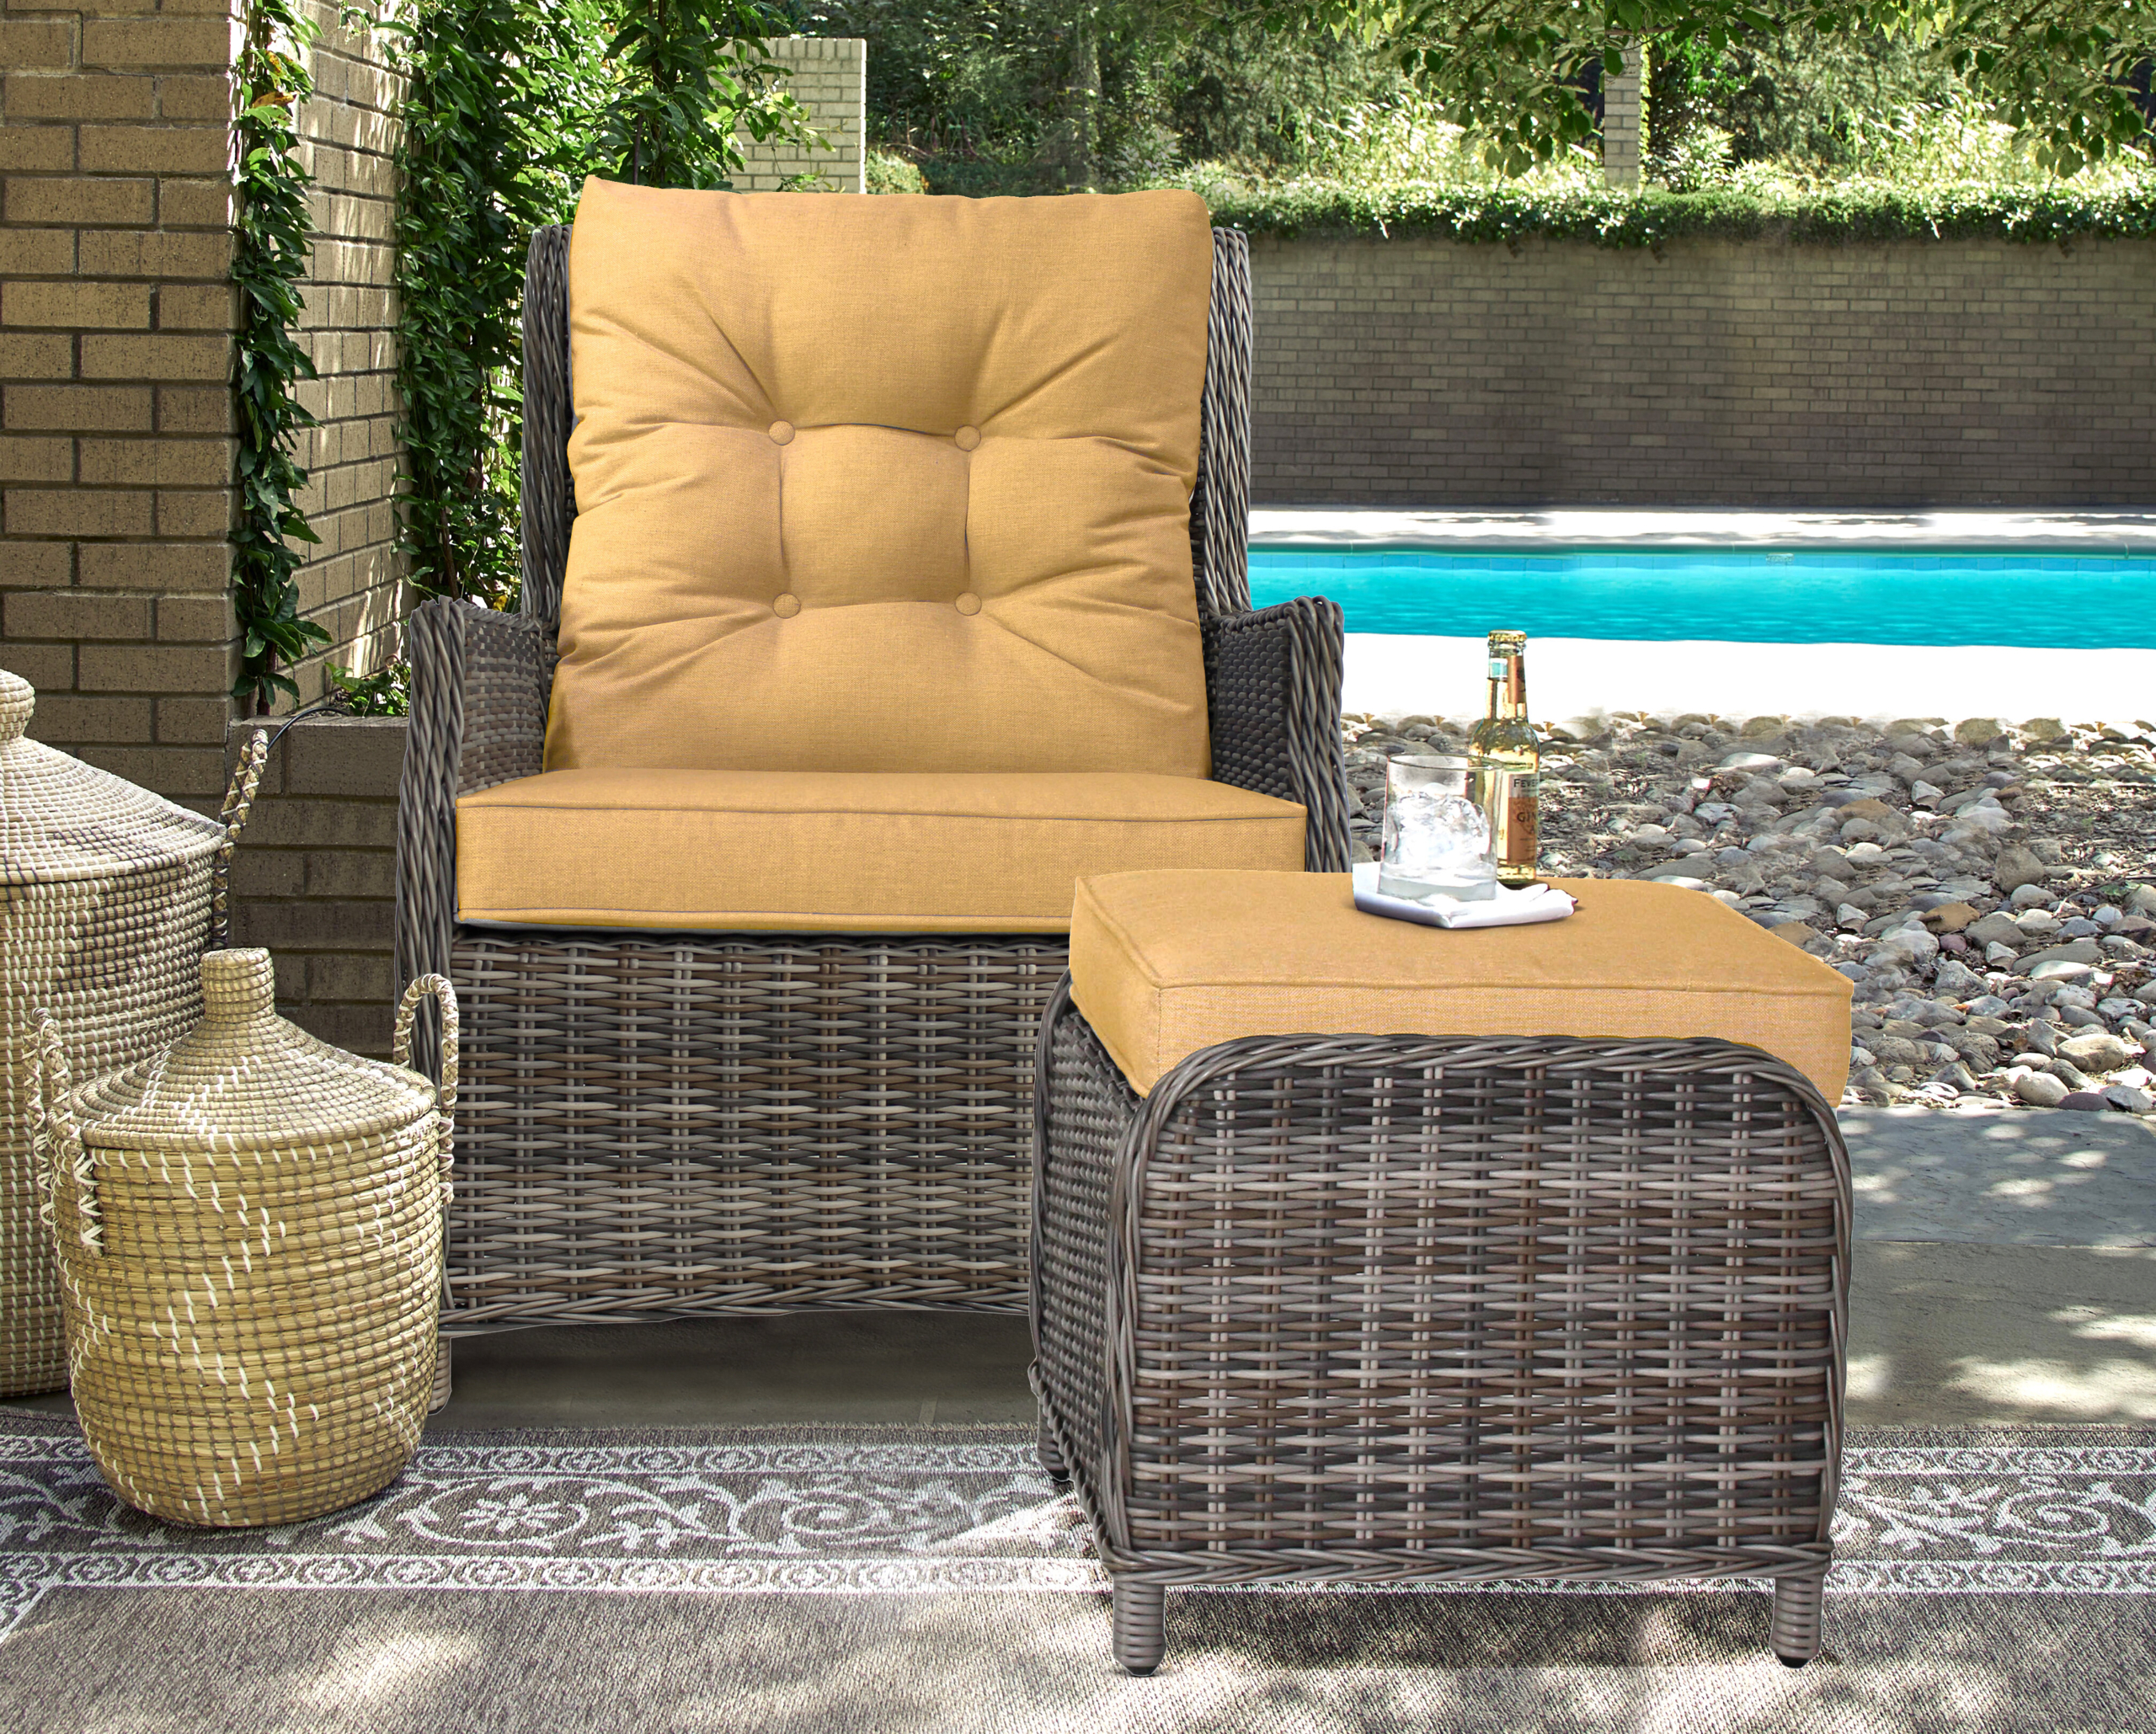 Outdoor Chairs With Ottoman Visualhunt, Oversized Patio Chairs With Ottoman